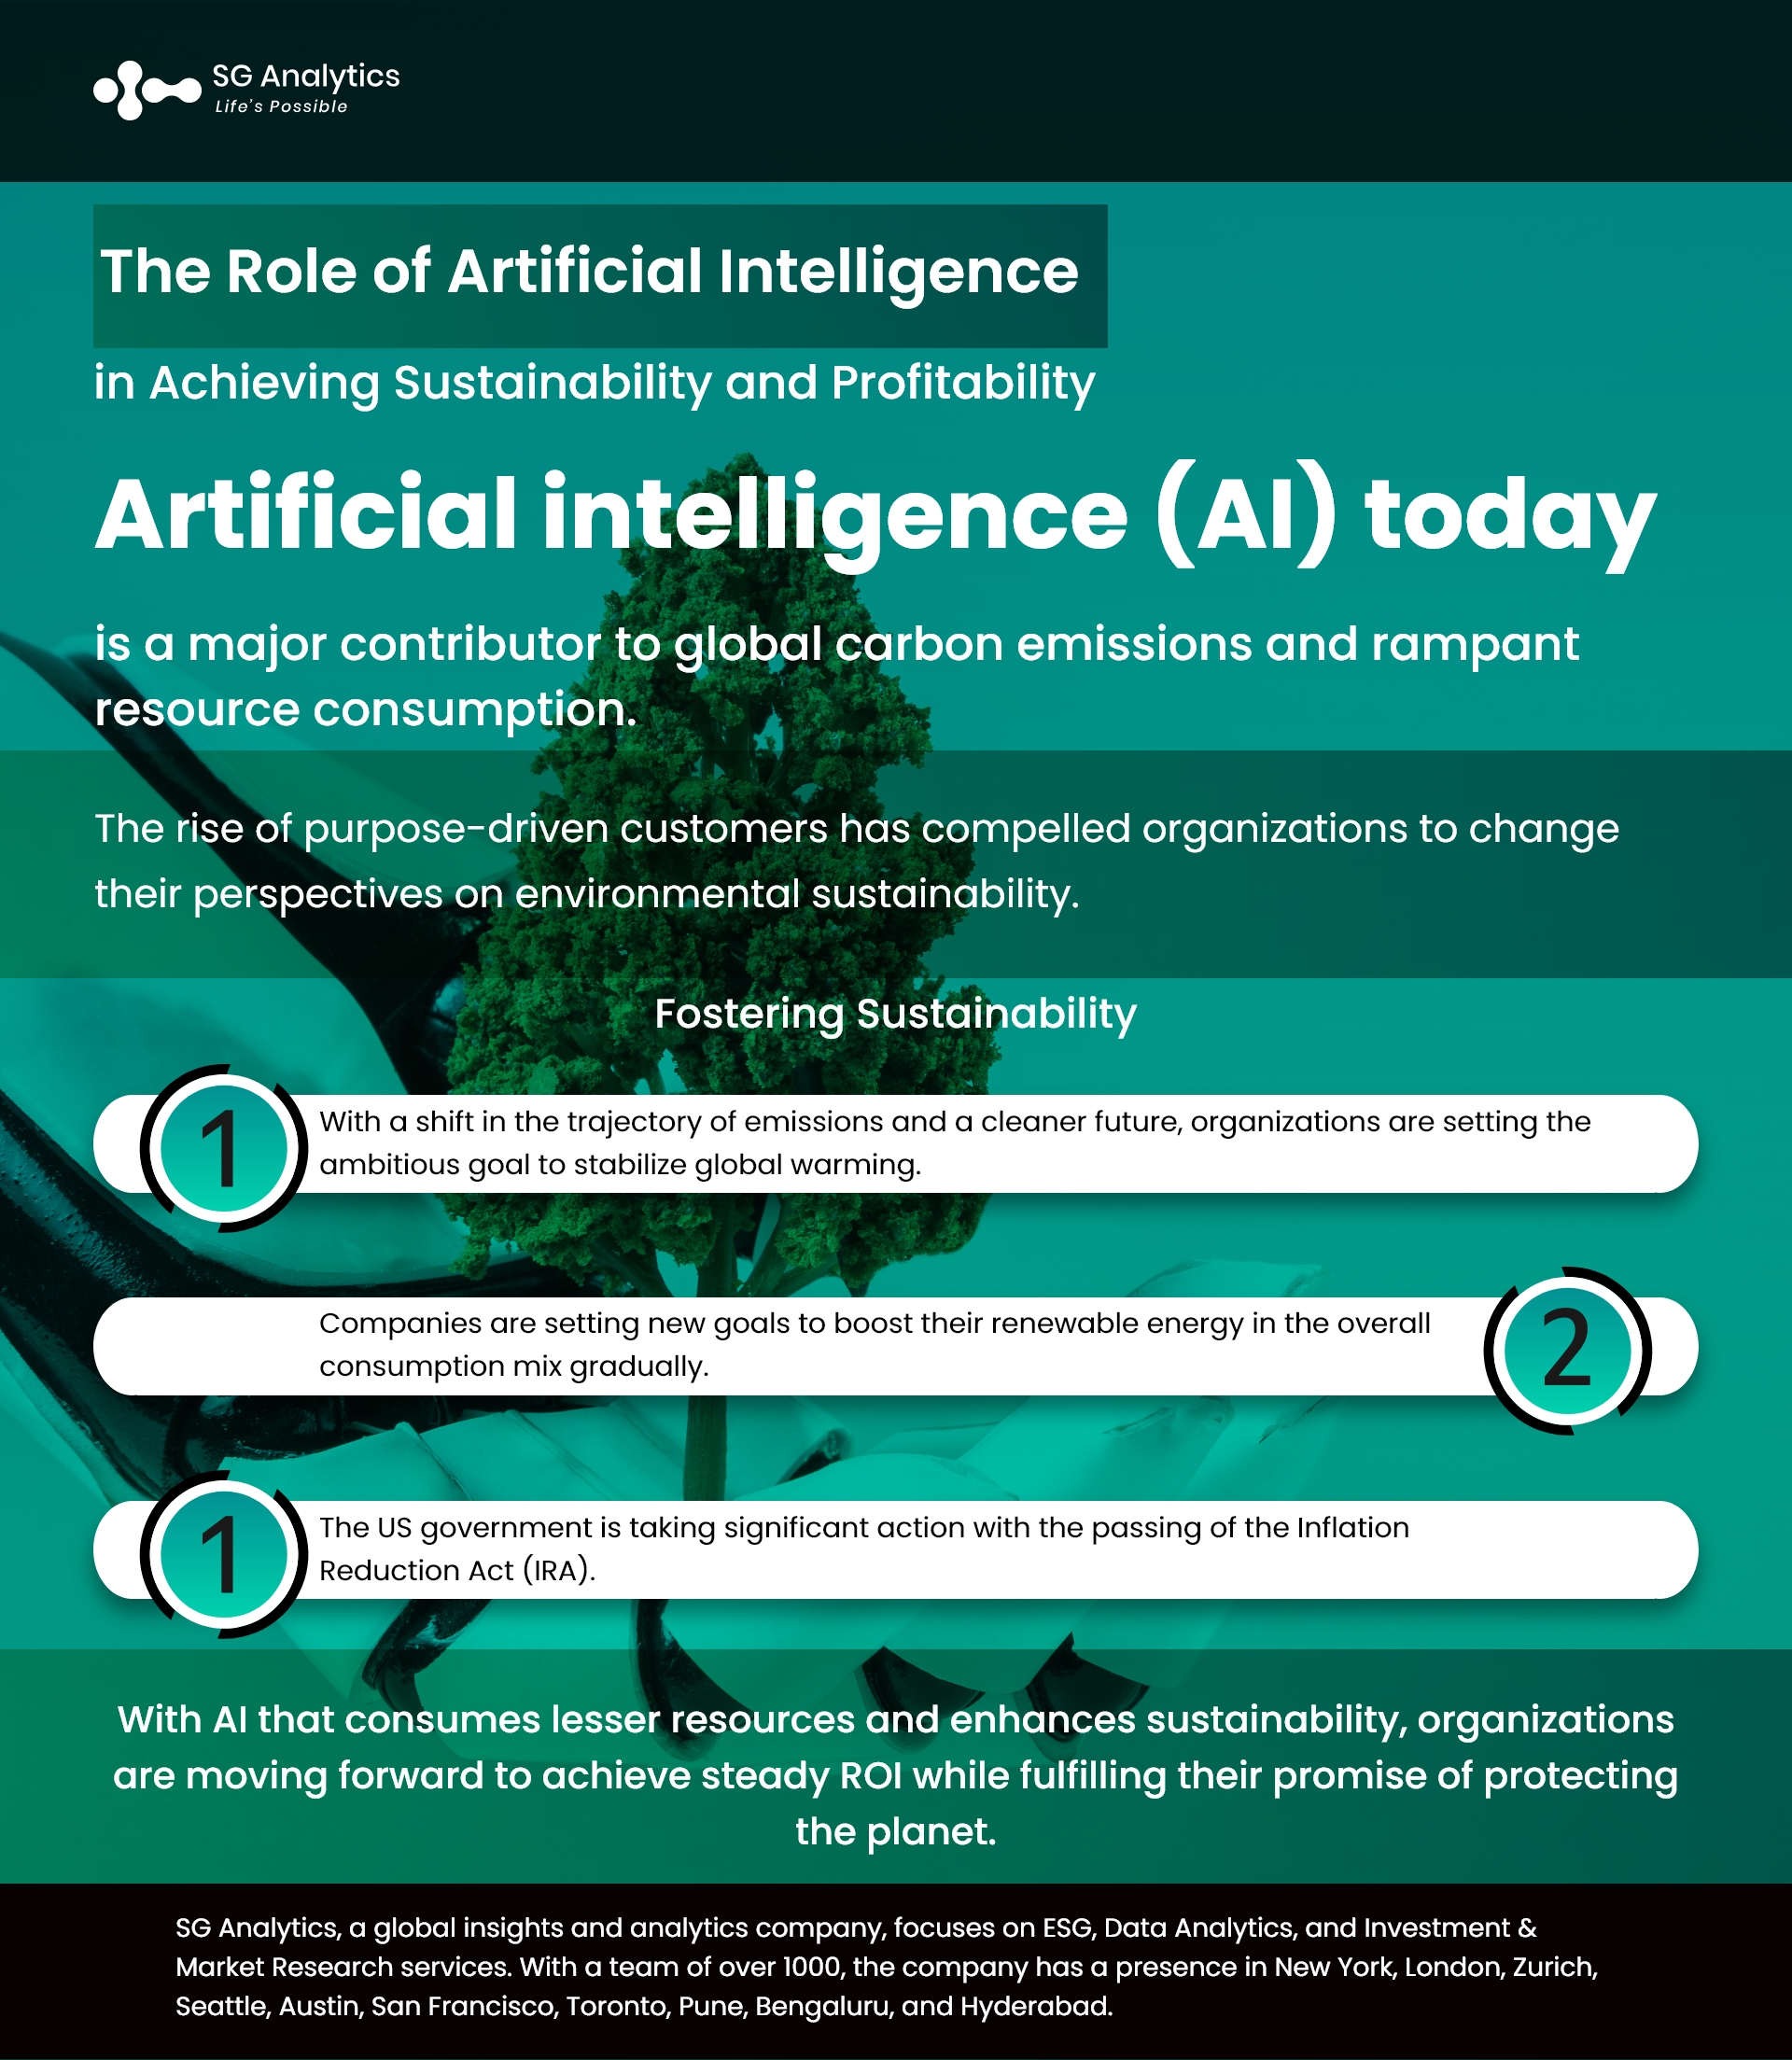 The Role of Artificial Intelligence in Achieving Sustainability and Profitability 